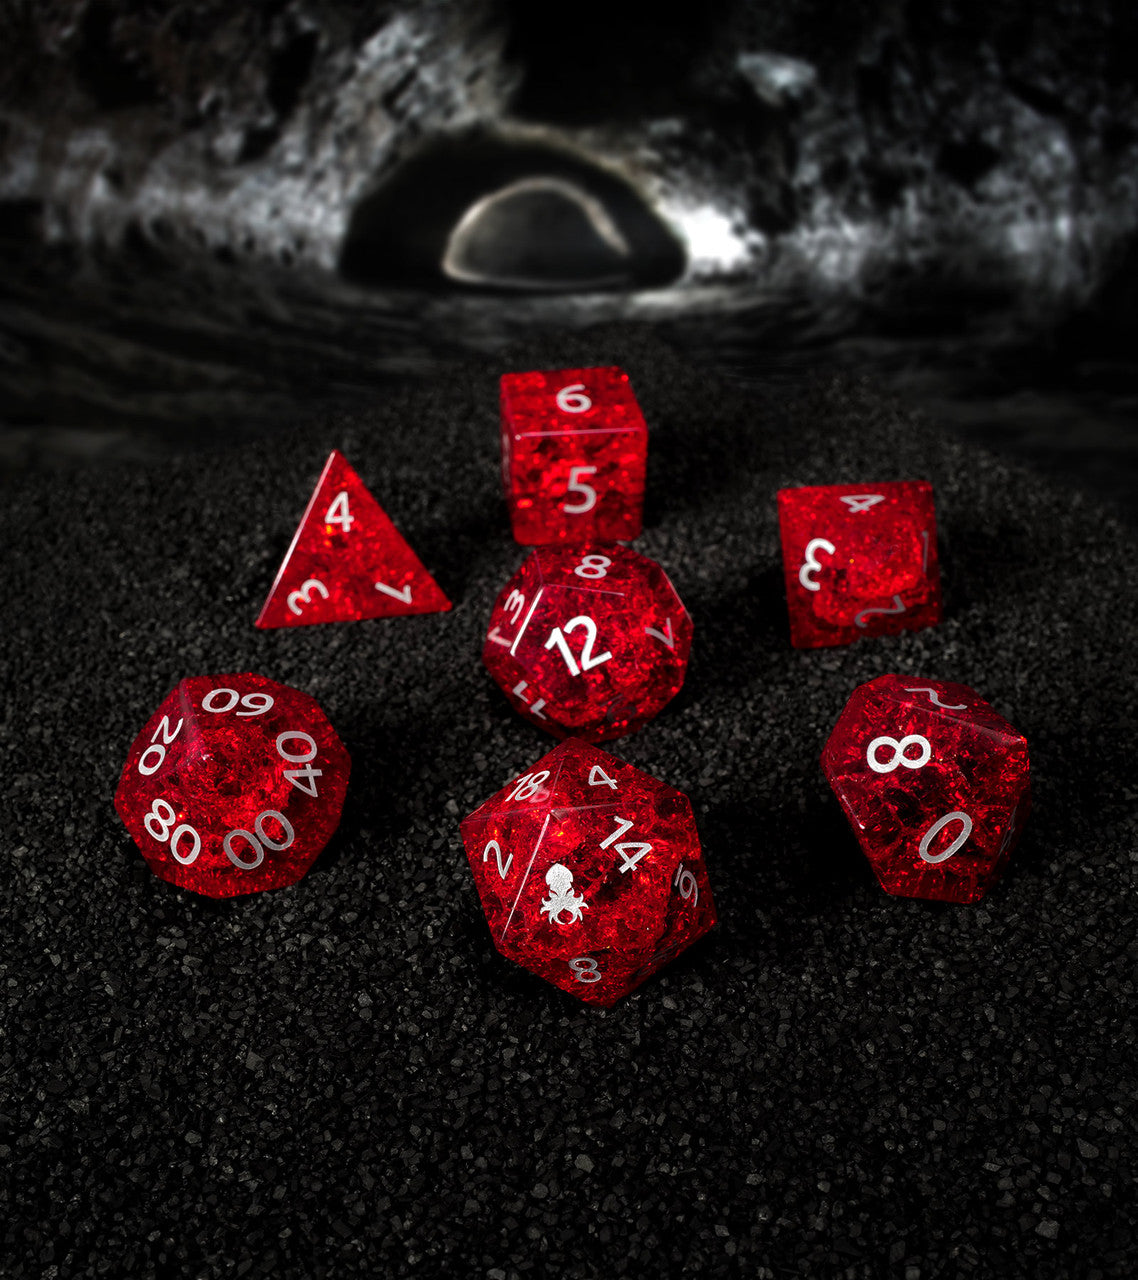 Tyrant Eye Red Cracked Glass 7PC Glass Dice Set